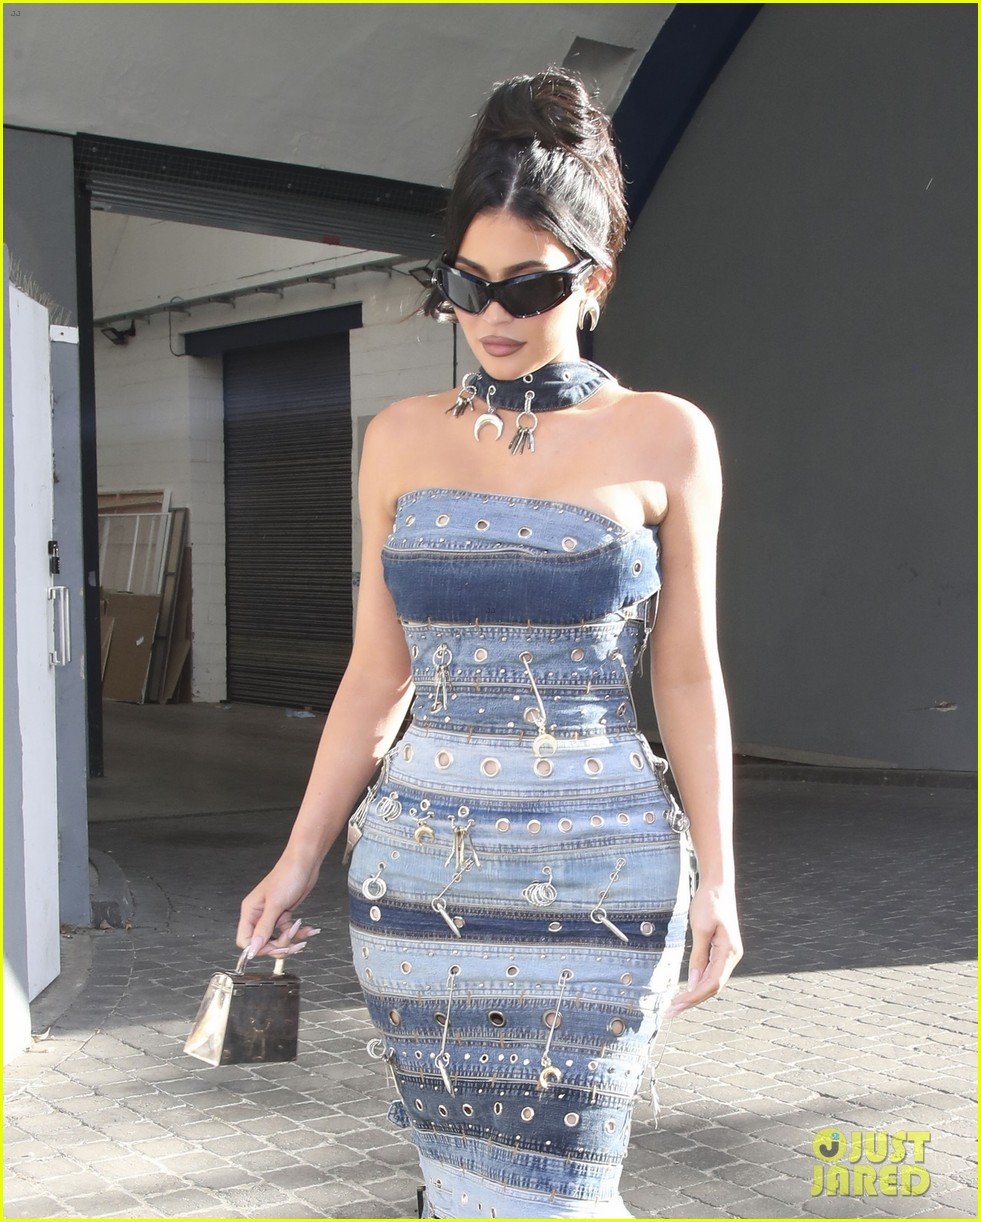 Kylie Jenner Rocks All Denim While Working In London Photo 1353679 Photo Gallery Just 